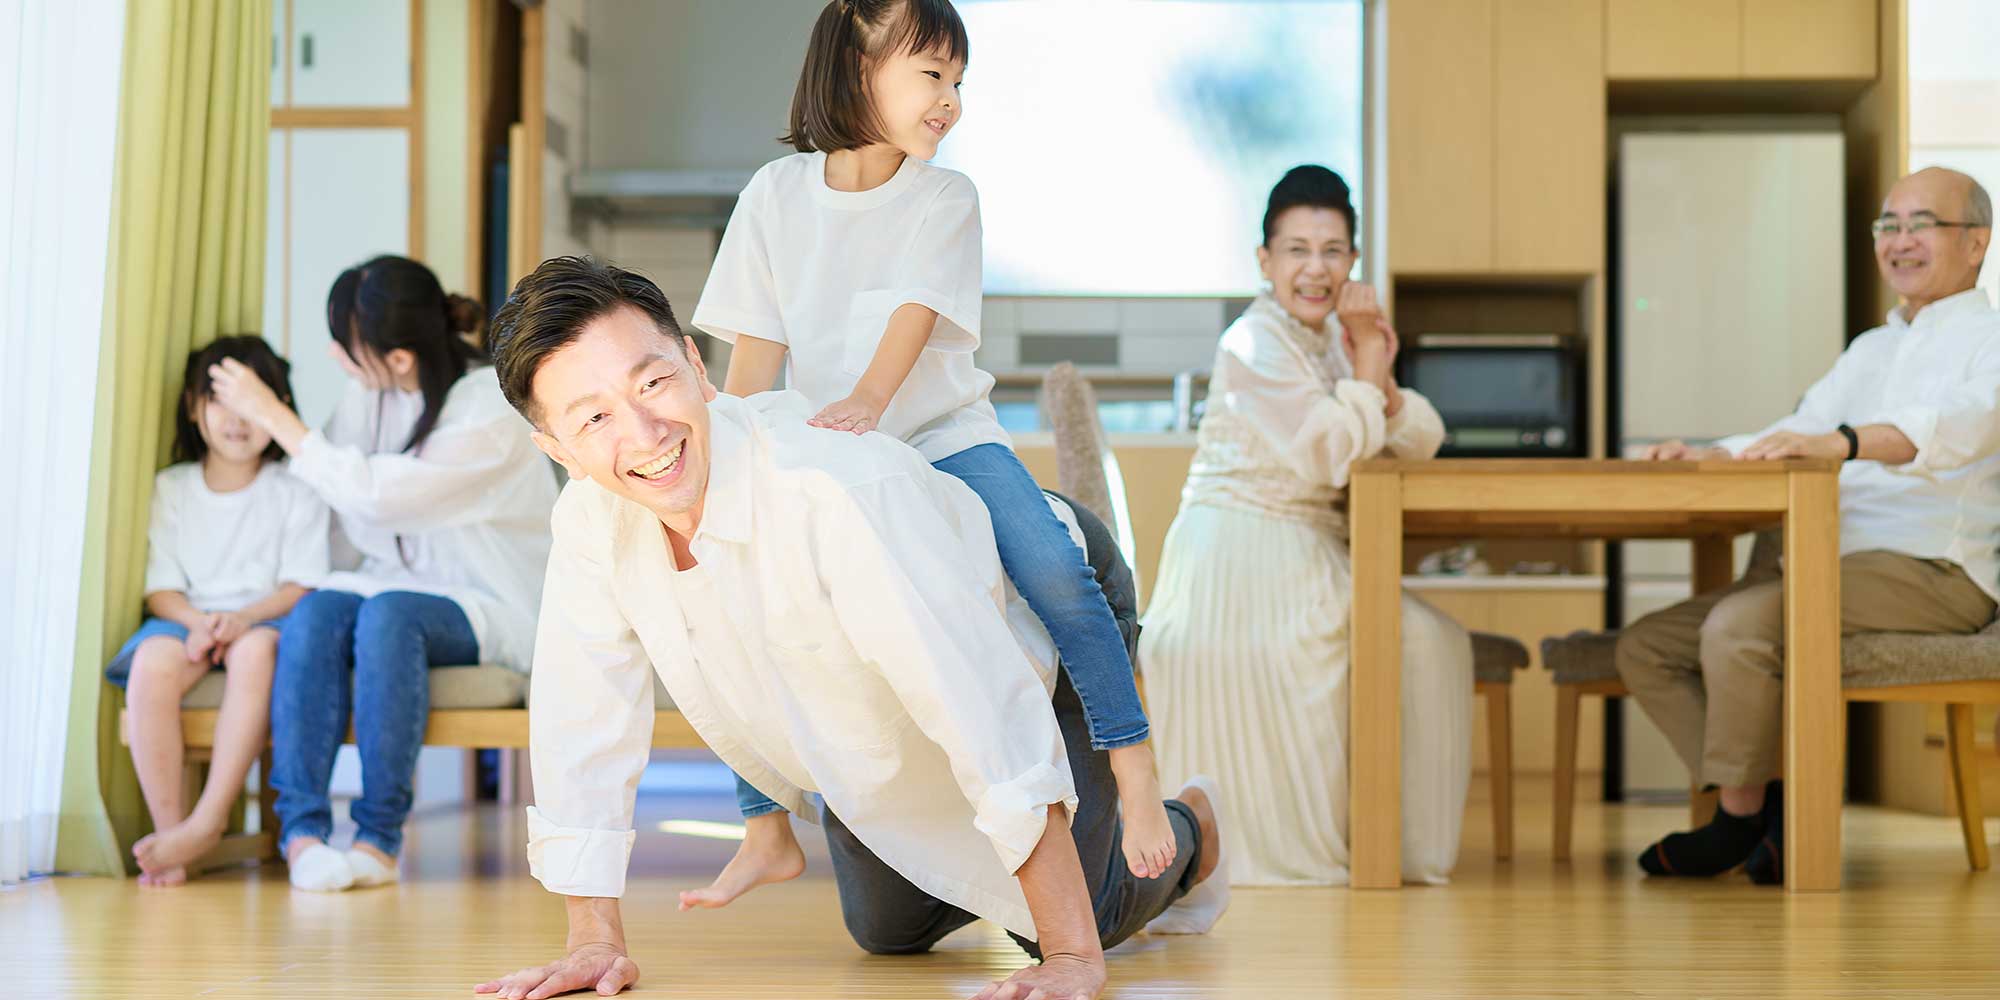 little-girl-playing-with-dad-room-(1).jpg - 裝潢